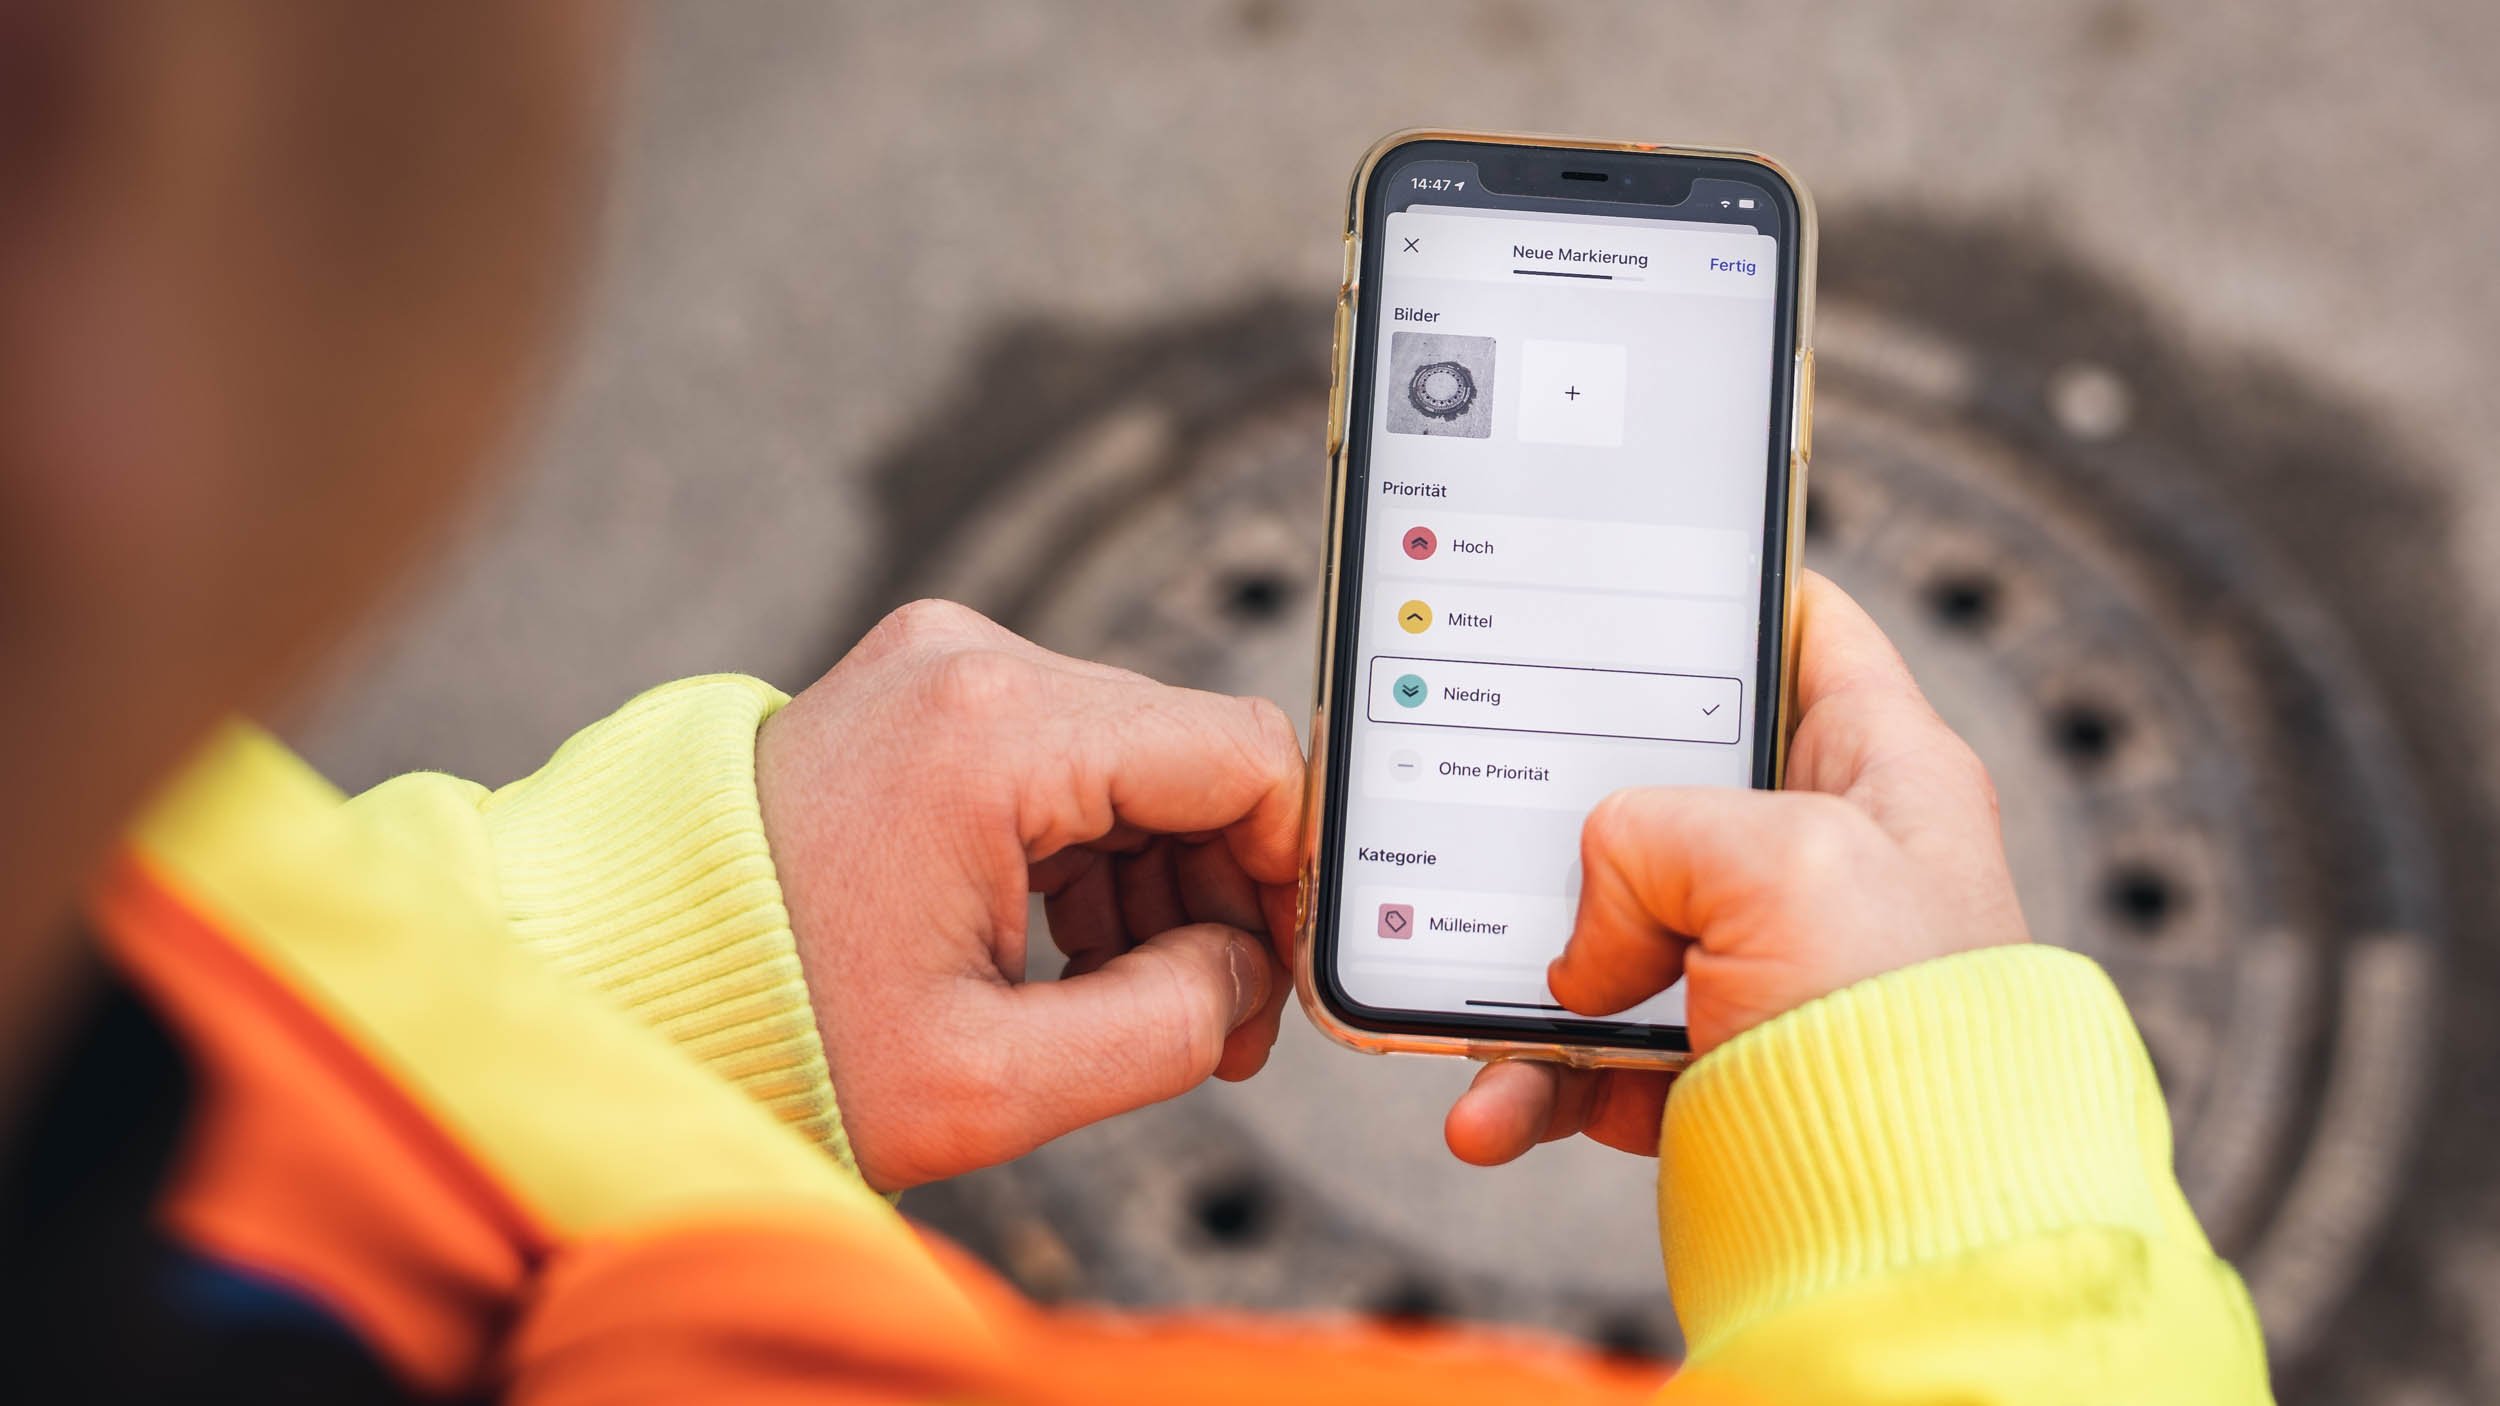 An employee from the public works department is holding a cell phone and the vialytics app is open. A manhole cover can be seen in the background